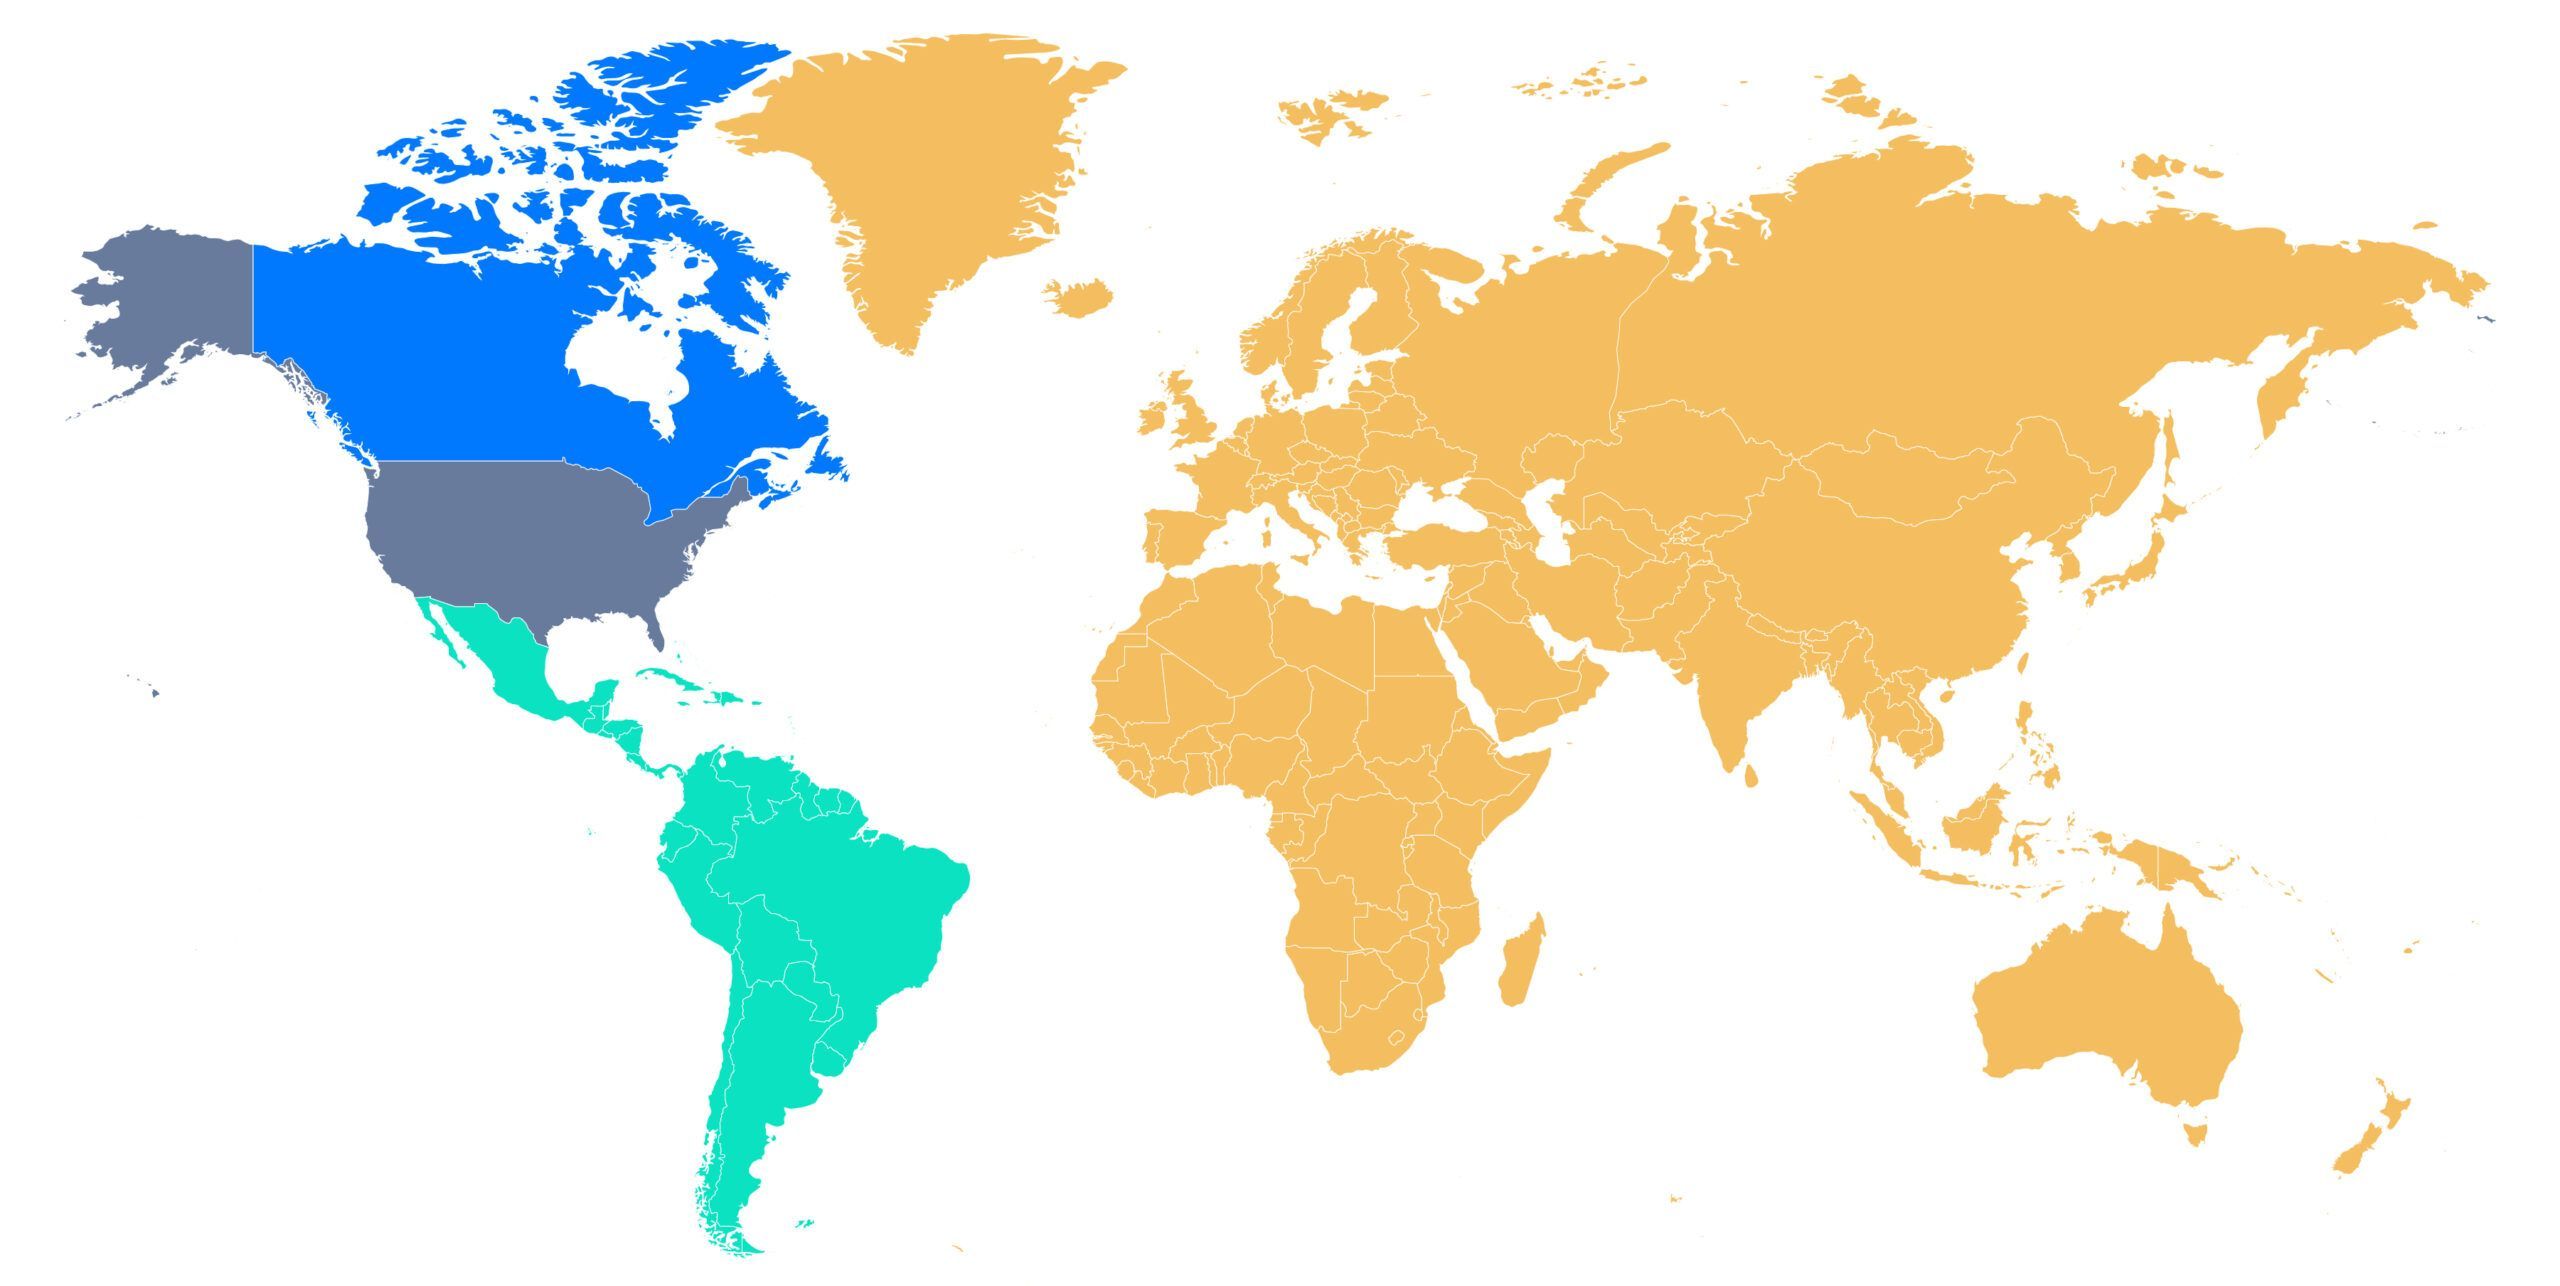 World map showing different regions highlighted in various colors to represent different sales territories.